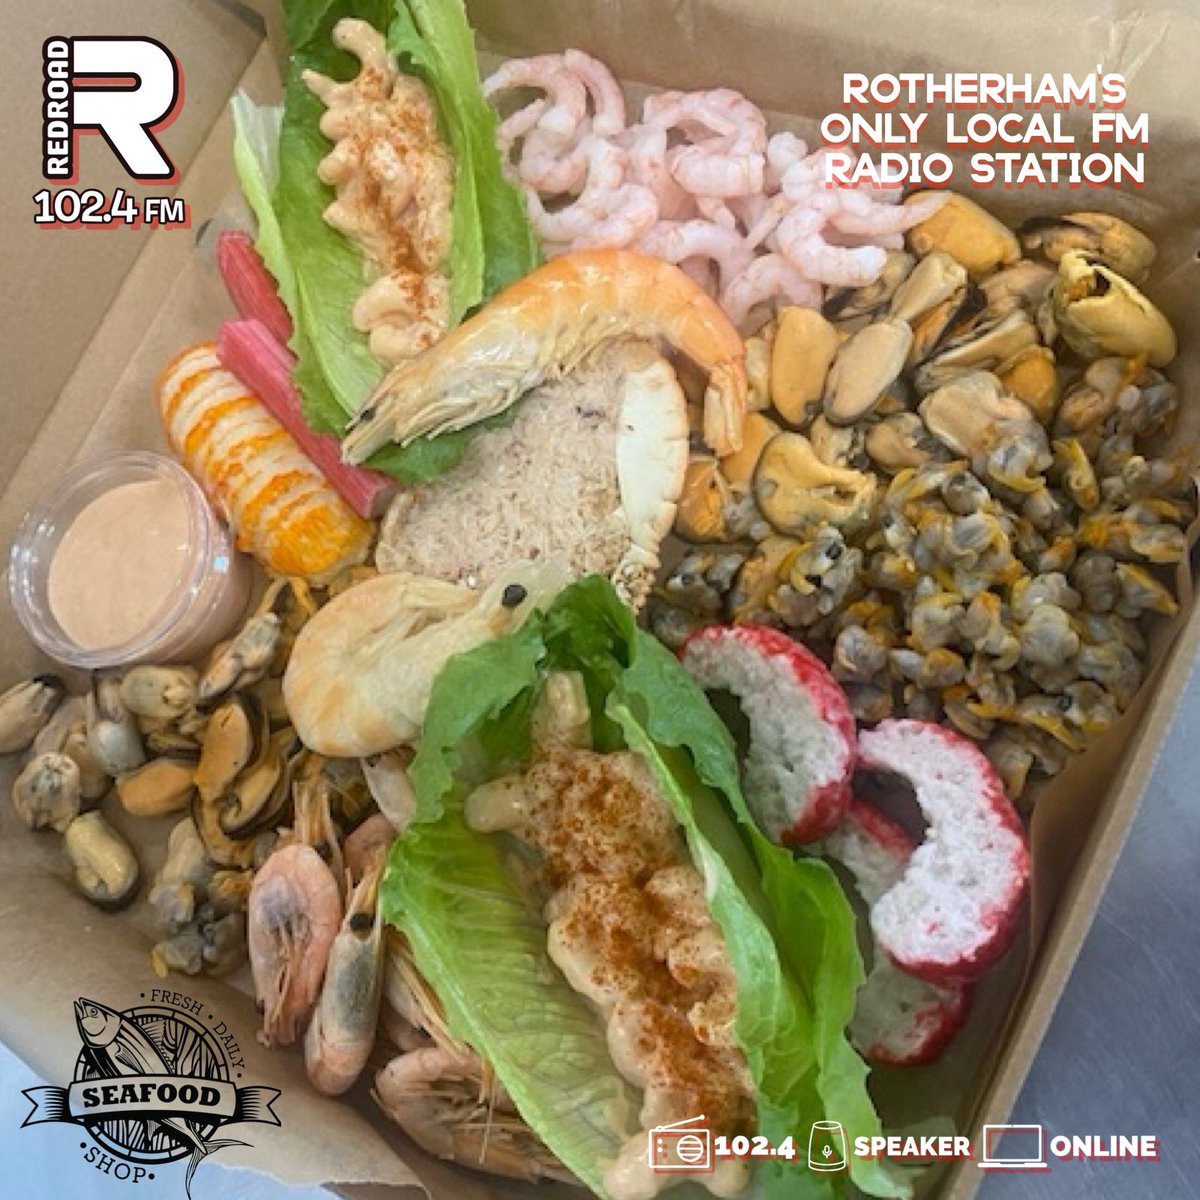 🤩 WIN WITH REDROAD FM & TASTE OF SEAFOOD! 🤩 On our Facebook page we are giving you the chance to win a 12” seafood mixed dressed crab platter with Taste of seafood in Renishaw! Click the link below and follow the instructions on the post to enter 👇🏻 facebook.com/share/p/p87Wa2…